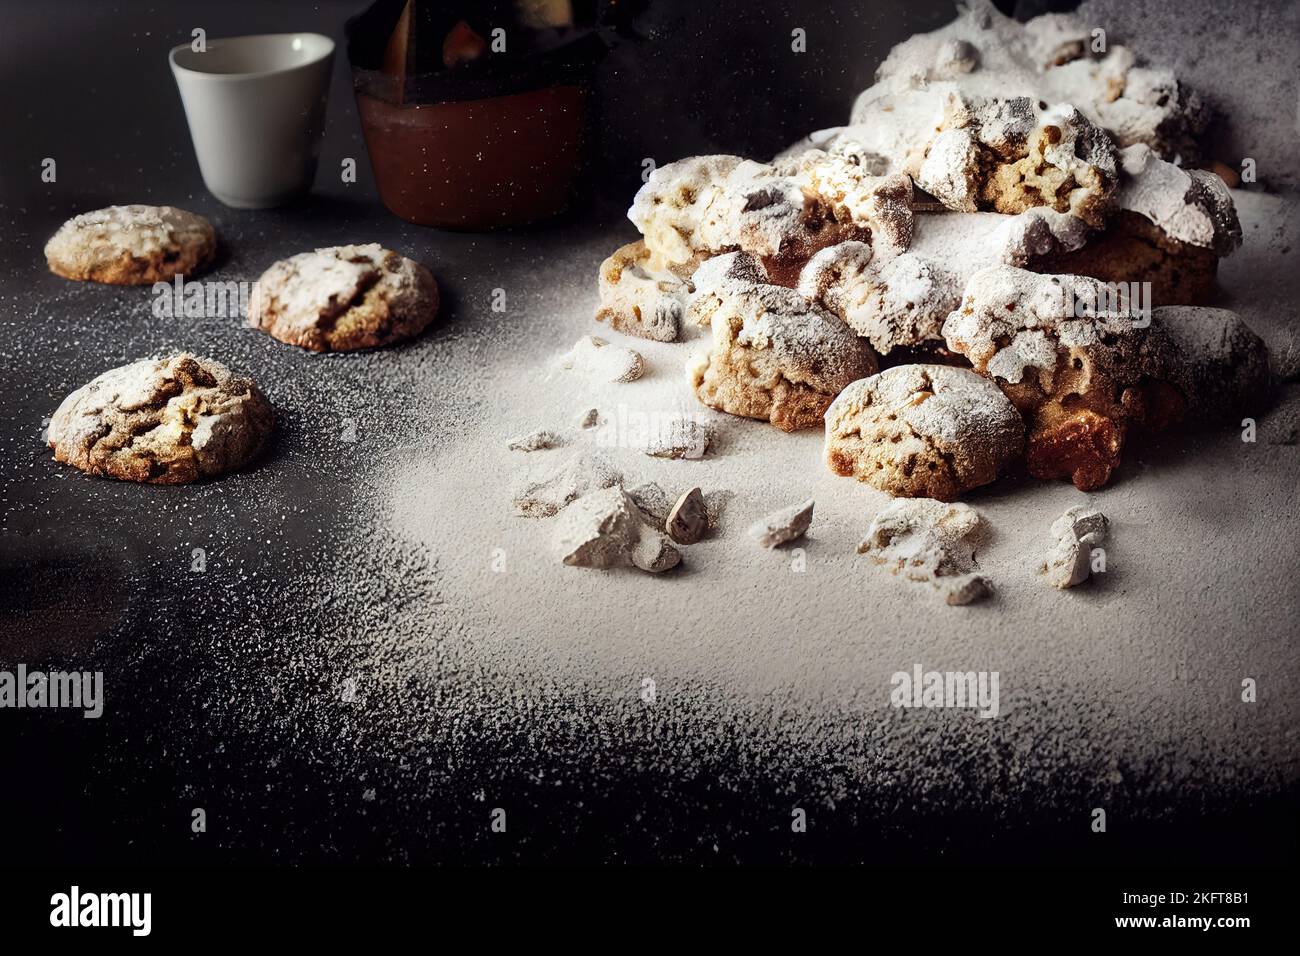 View from above of some Christmas cookies surrounded by flour Stock Photo